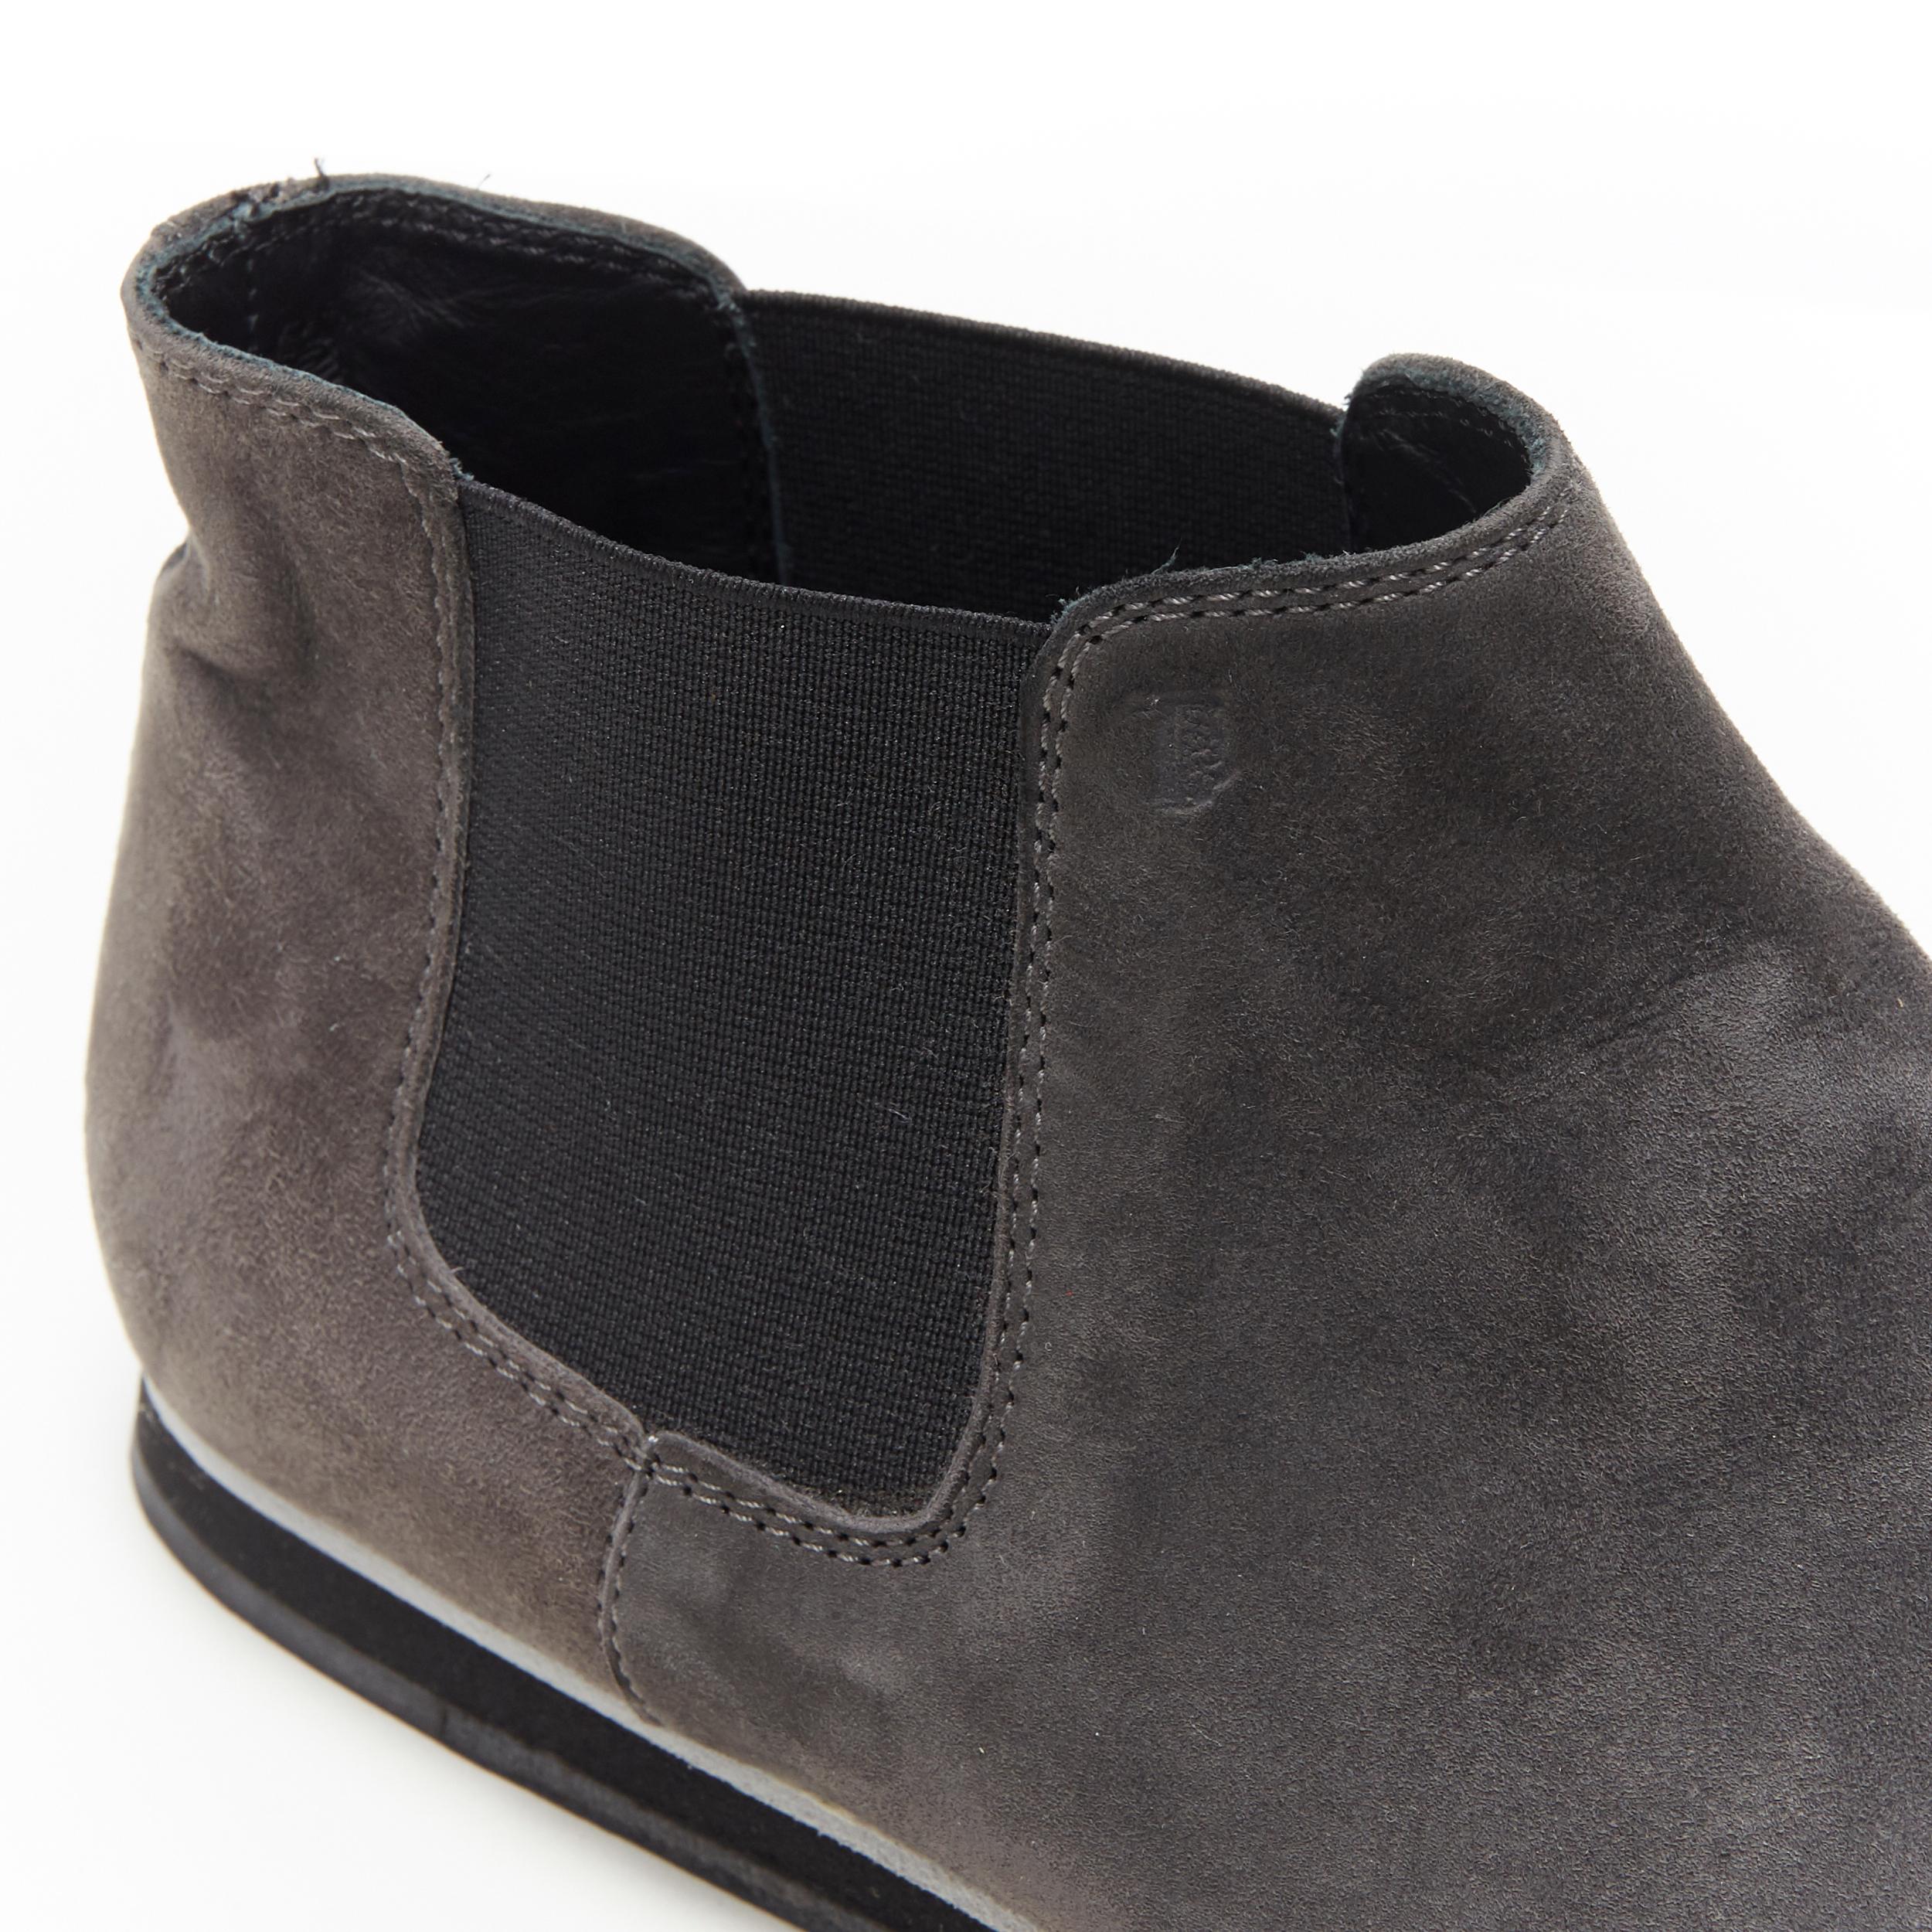 TOD'S No Code dark grey suede elastic gusset round toe flat ankle bootie EU37 For Sale 2